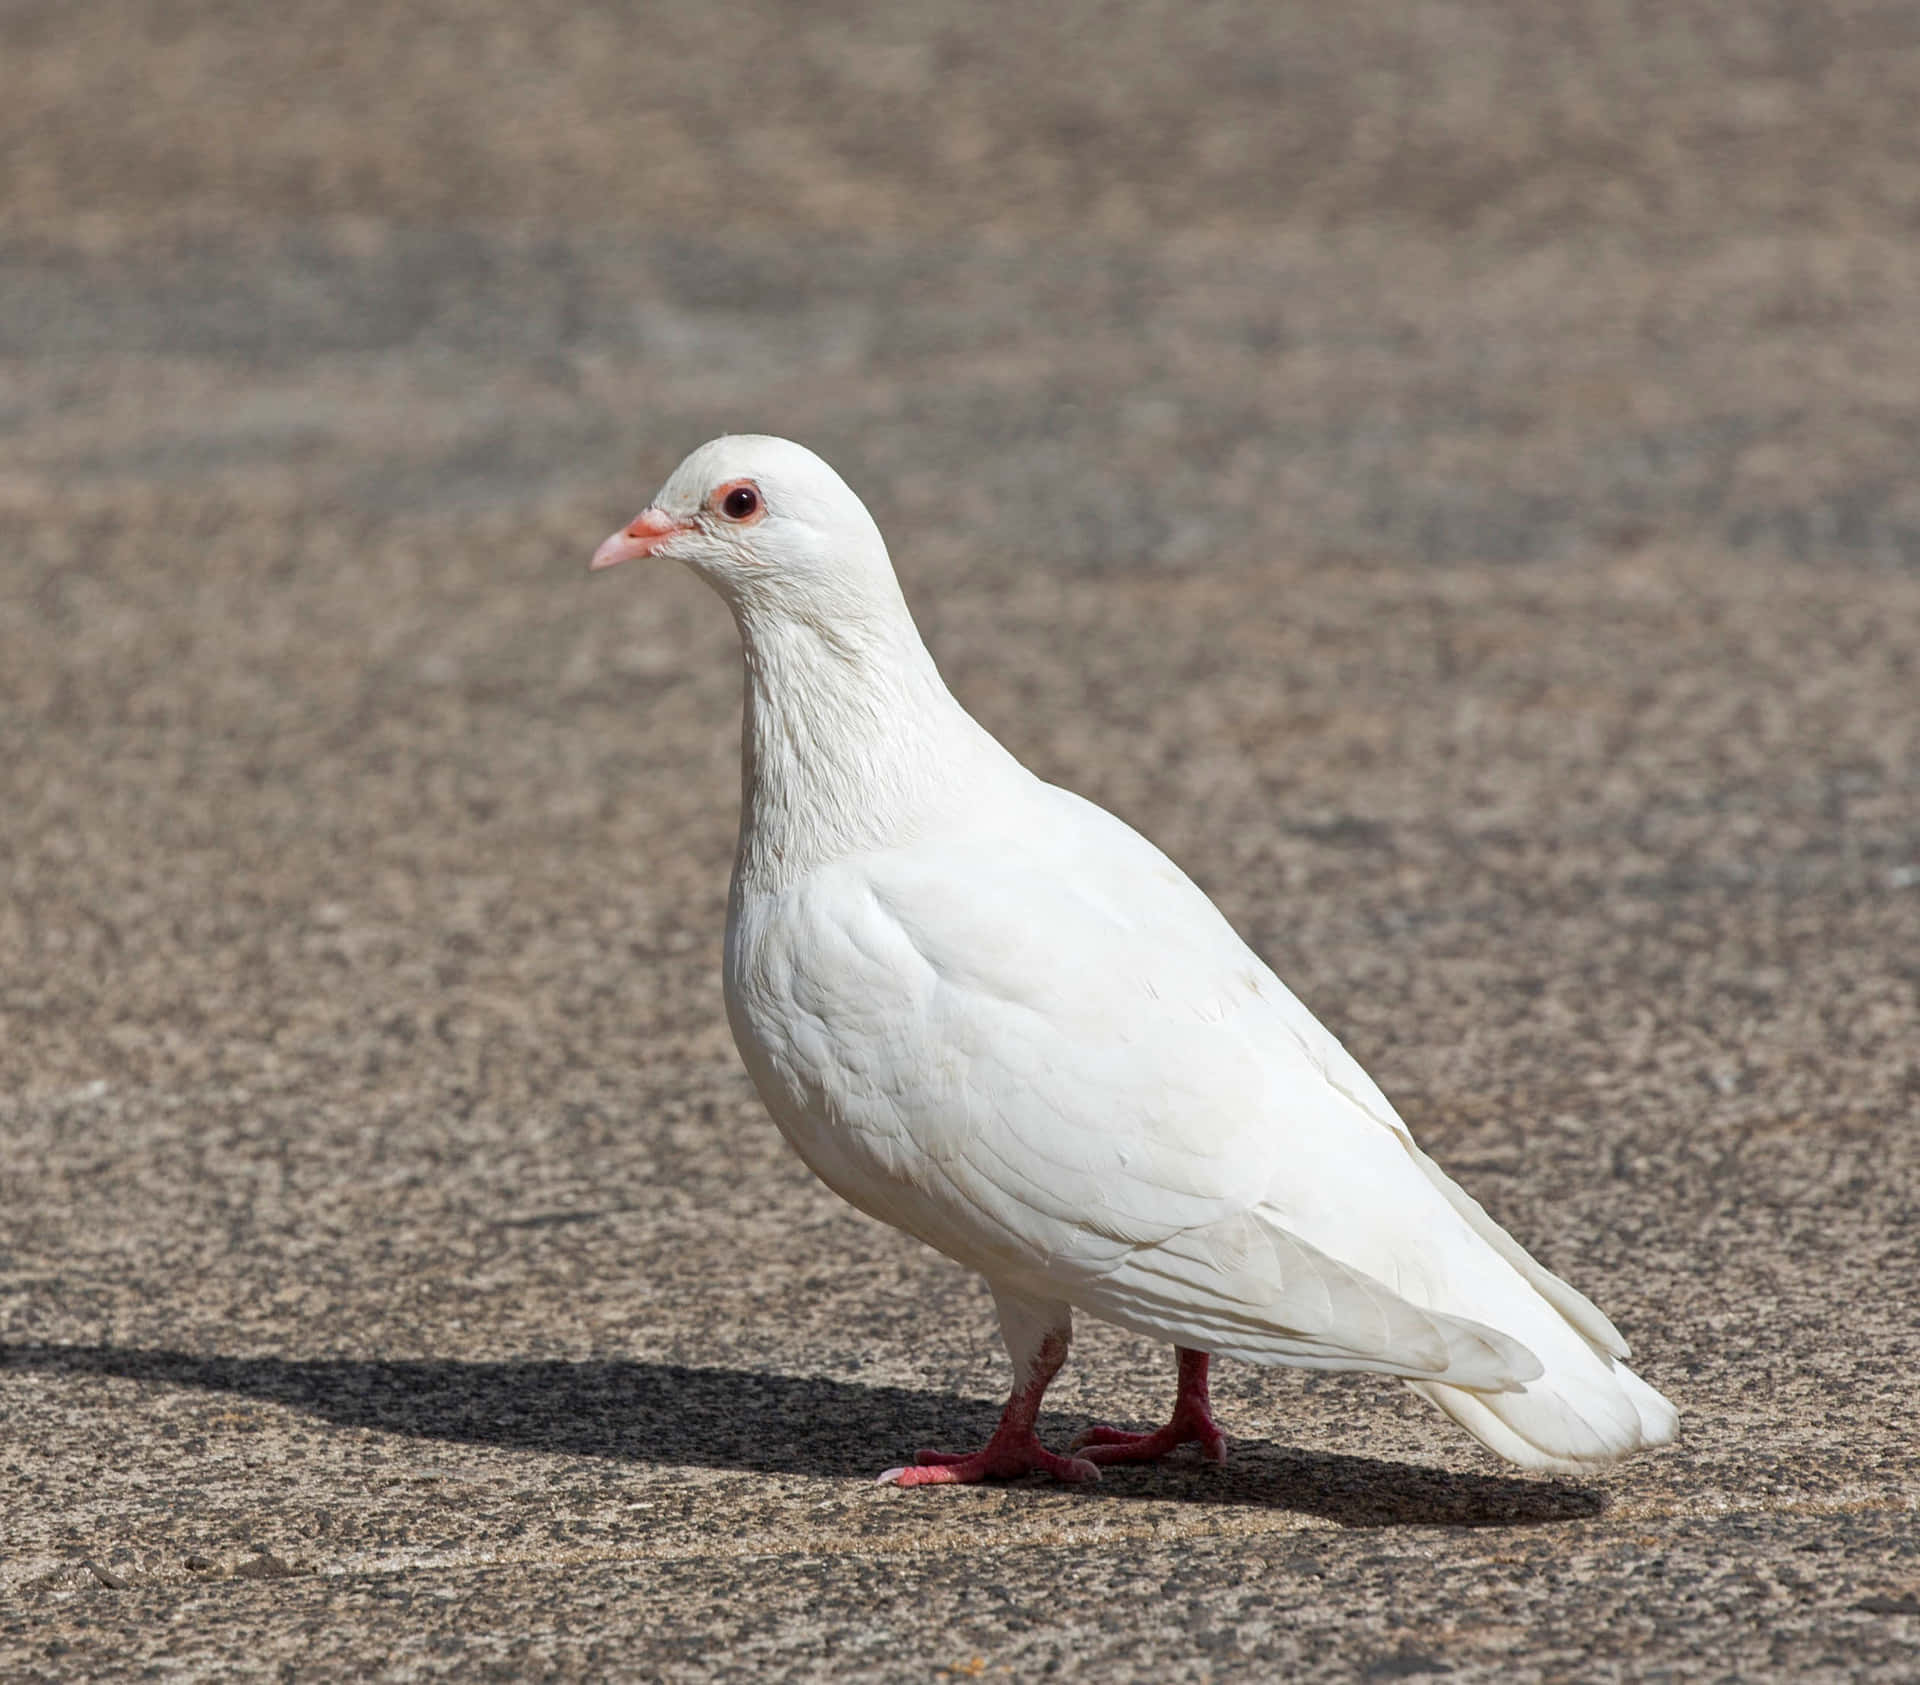 A white dove offering a message of peace and hope.